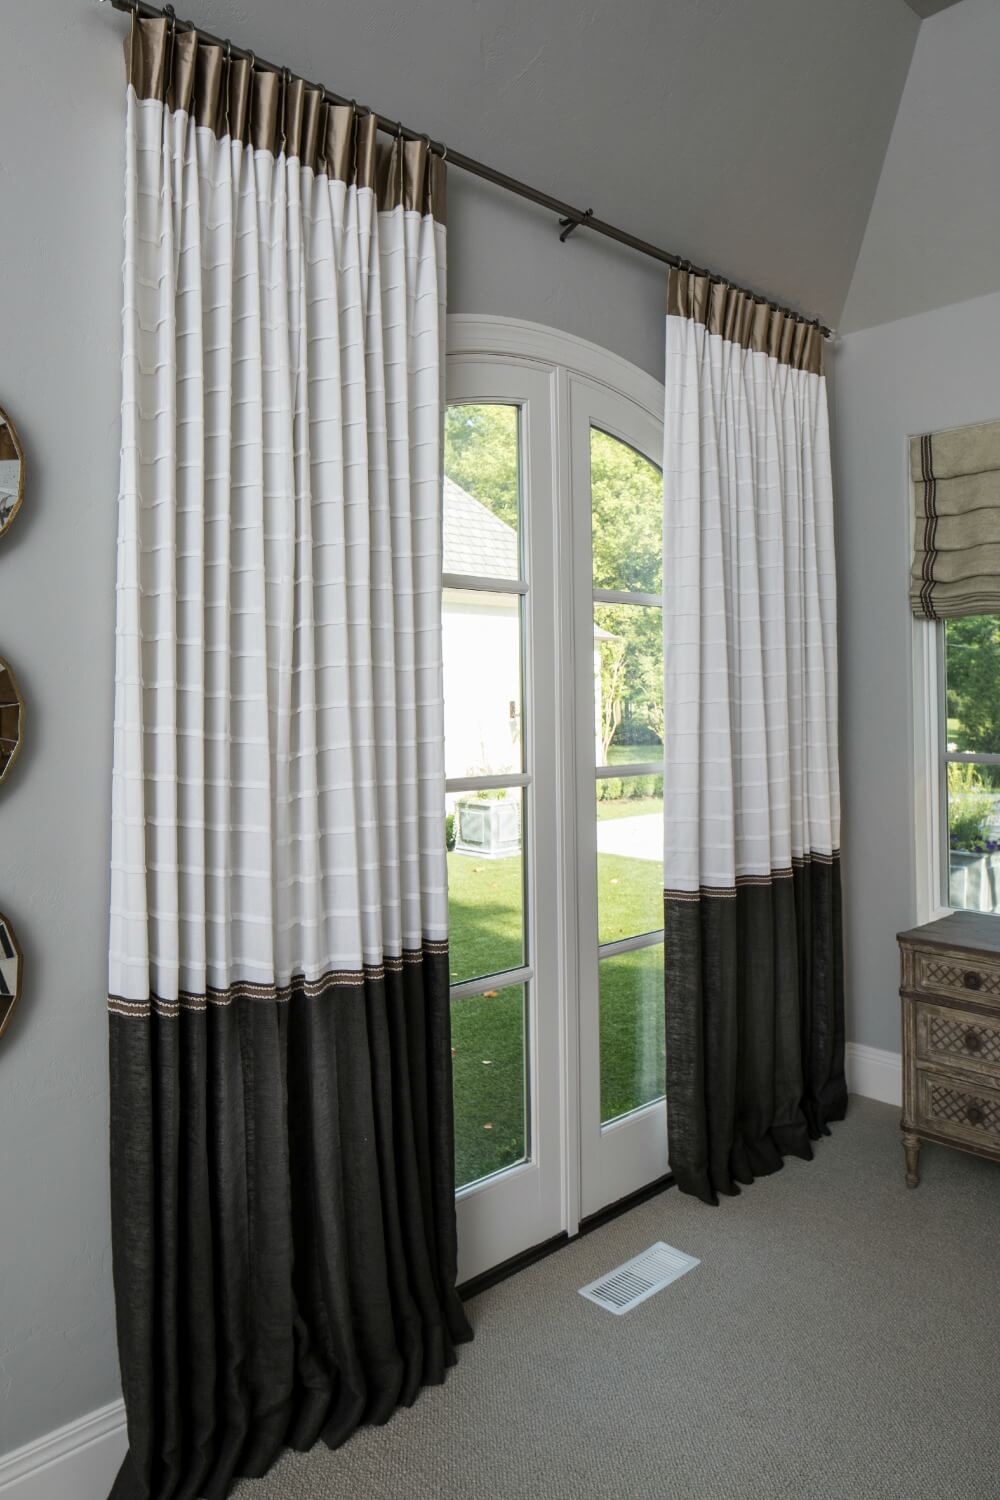 Top 5 Reasons to Use an Expert for Window Treatments